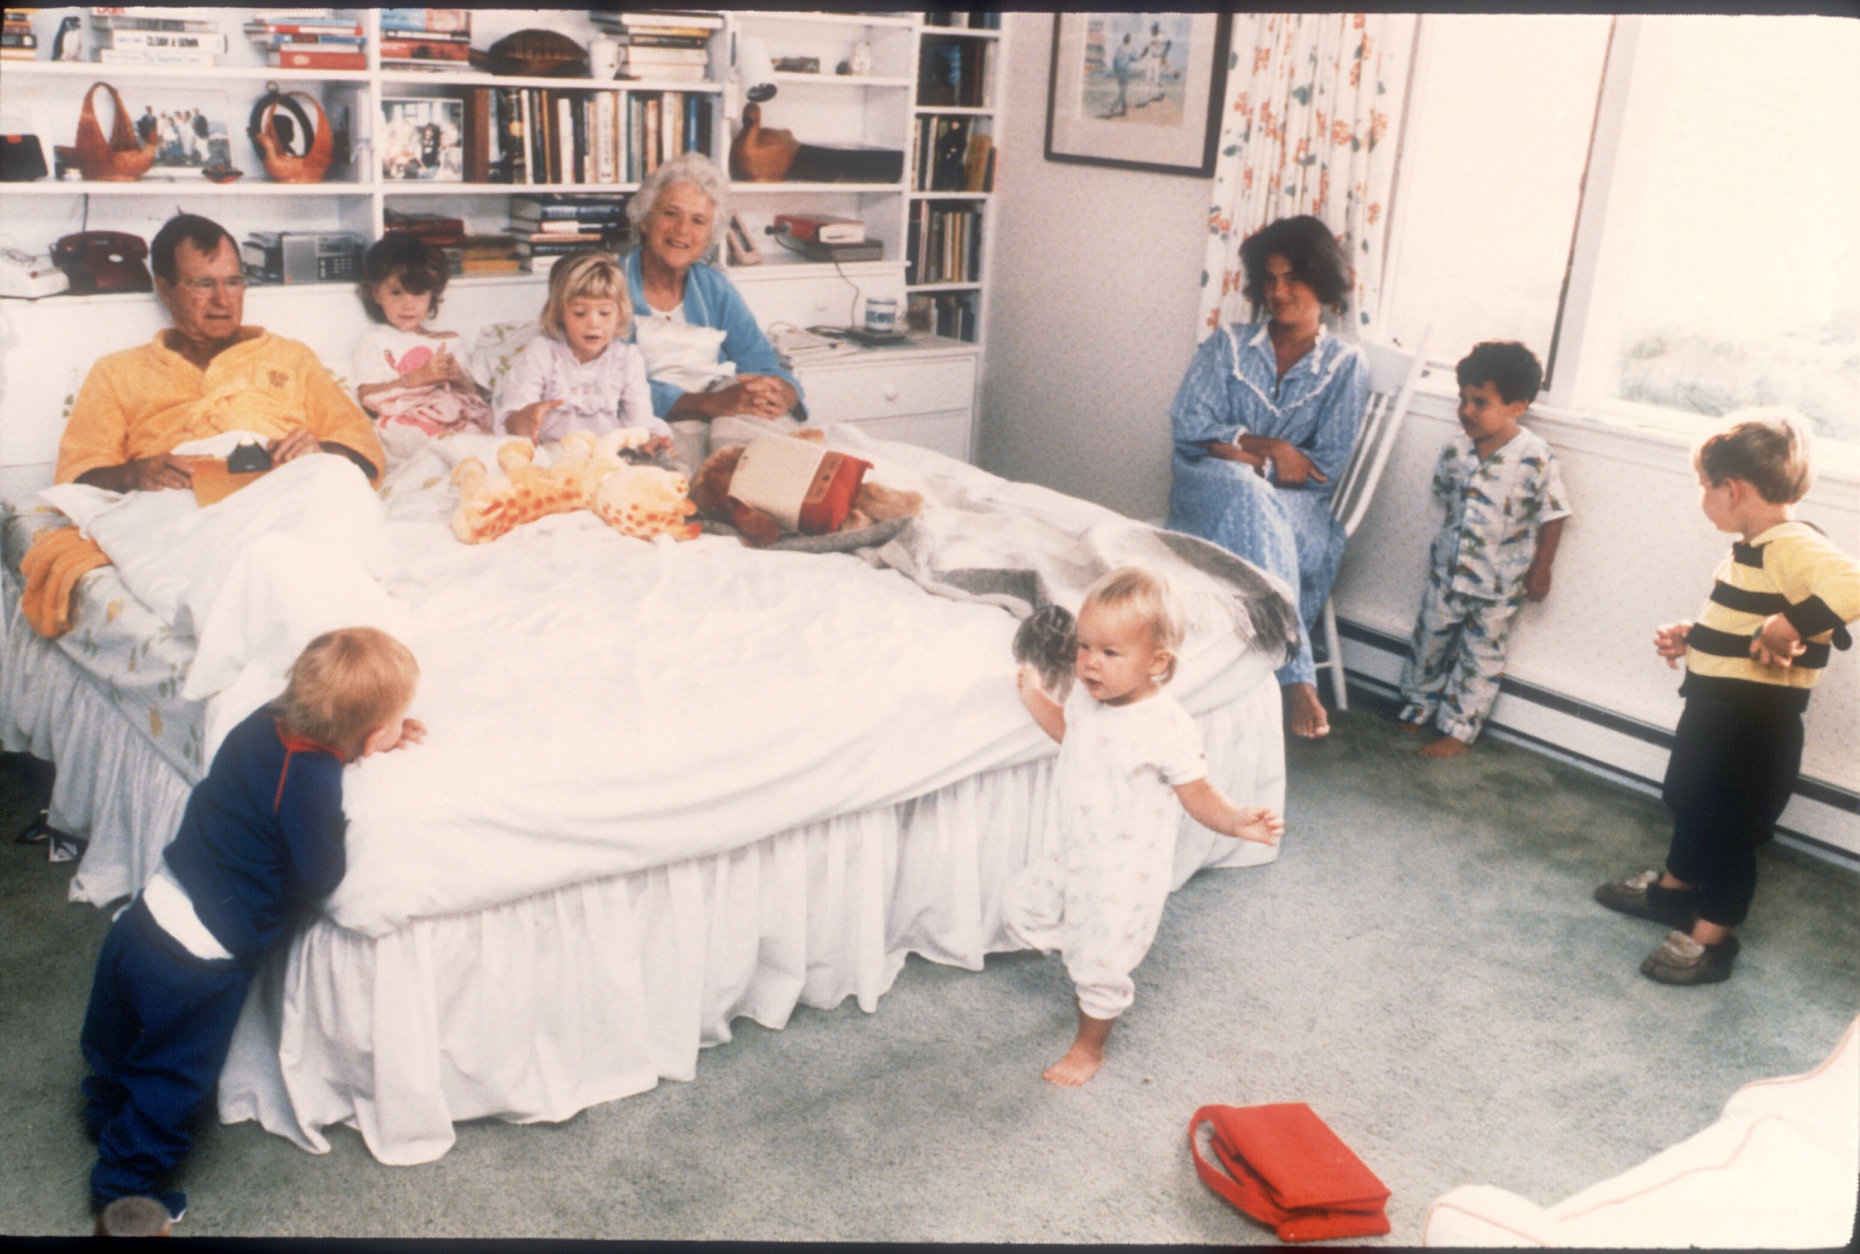 374836 01: George Bush and his wife Barbara sit in their bed as six of their fourteen grandchildren play around them in Washington, D.C. Bush was born June 12, 1924 in Milton, Massachusetts. He attended both Phillips Academy in Andover and Yale University. (Photo by Liaison)